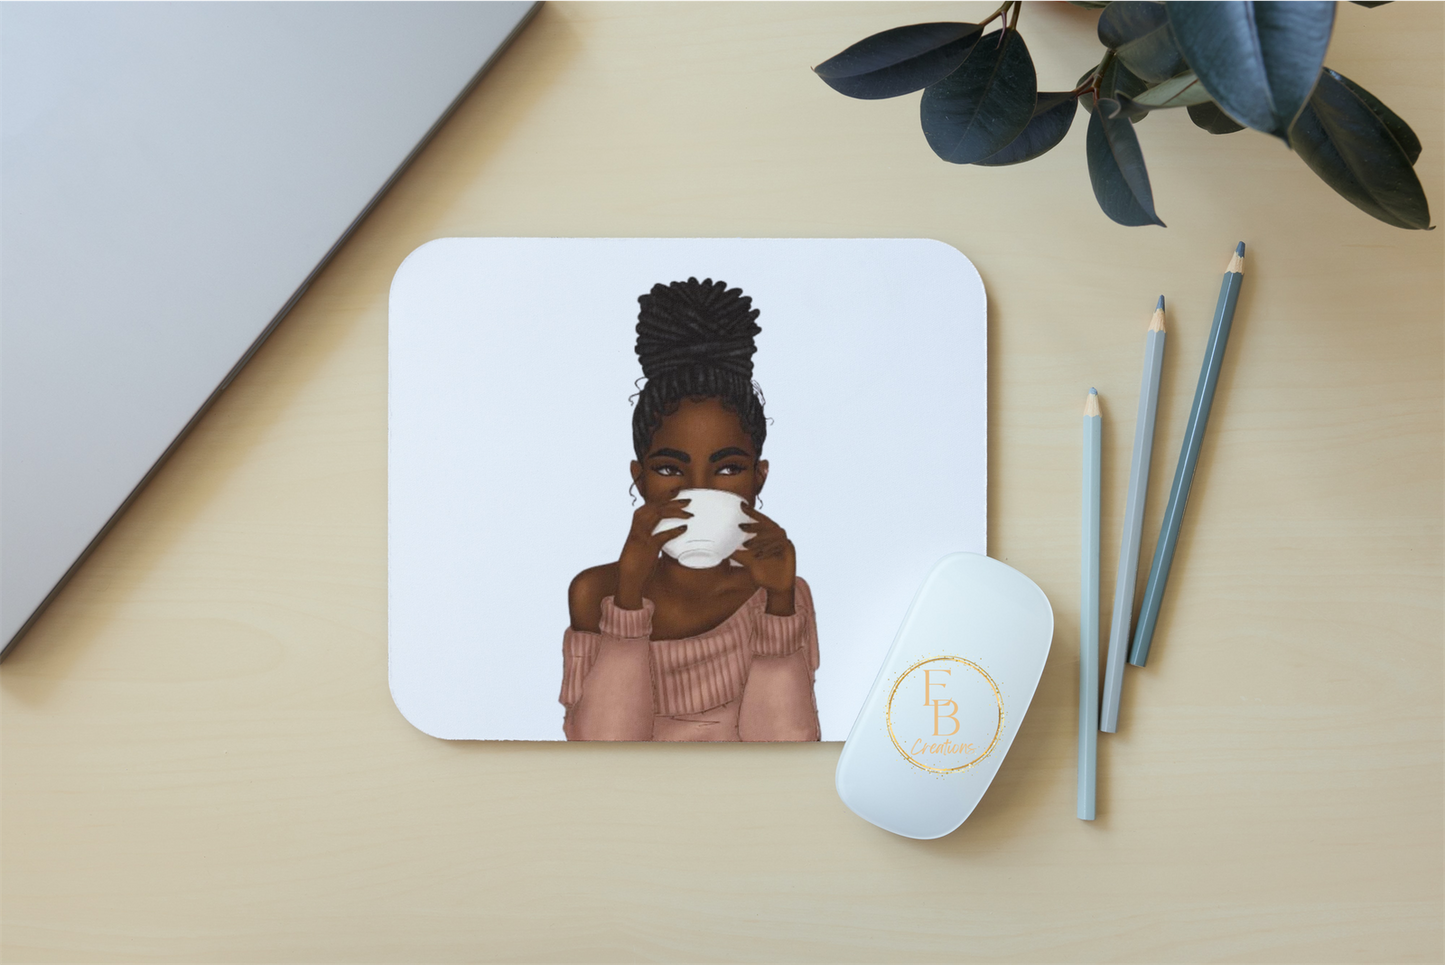 Black girl with bun mouse pad | Melanin Woman Office accessories supplies | Pad for mouse - Eb Creations Mouse Pad Black girl with bun mouse pad | Melanin Woman Office accessories supplies | Pad for mouse